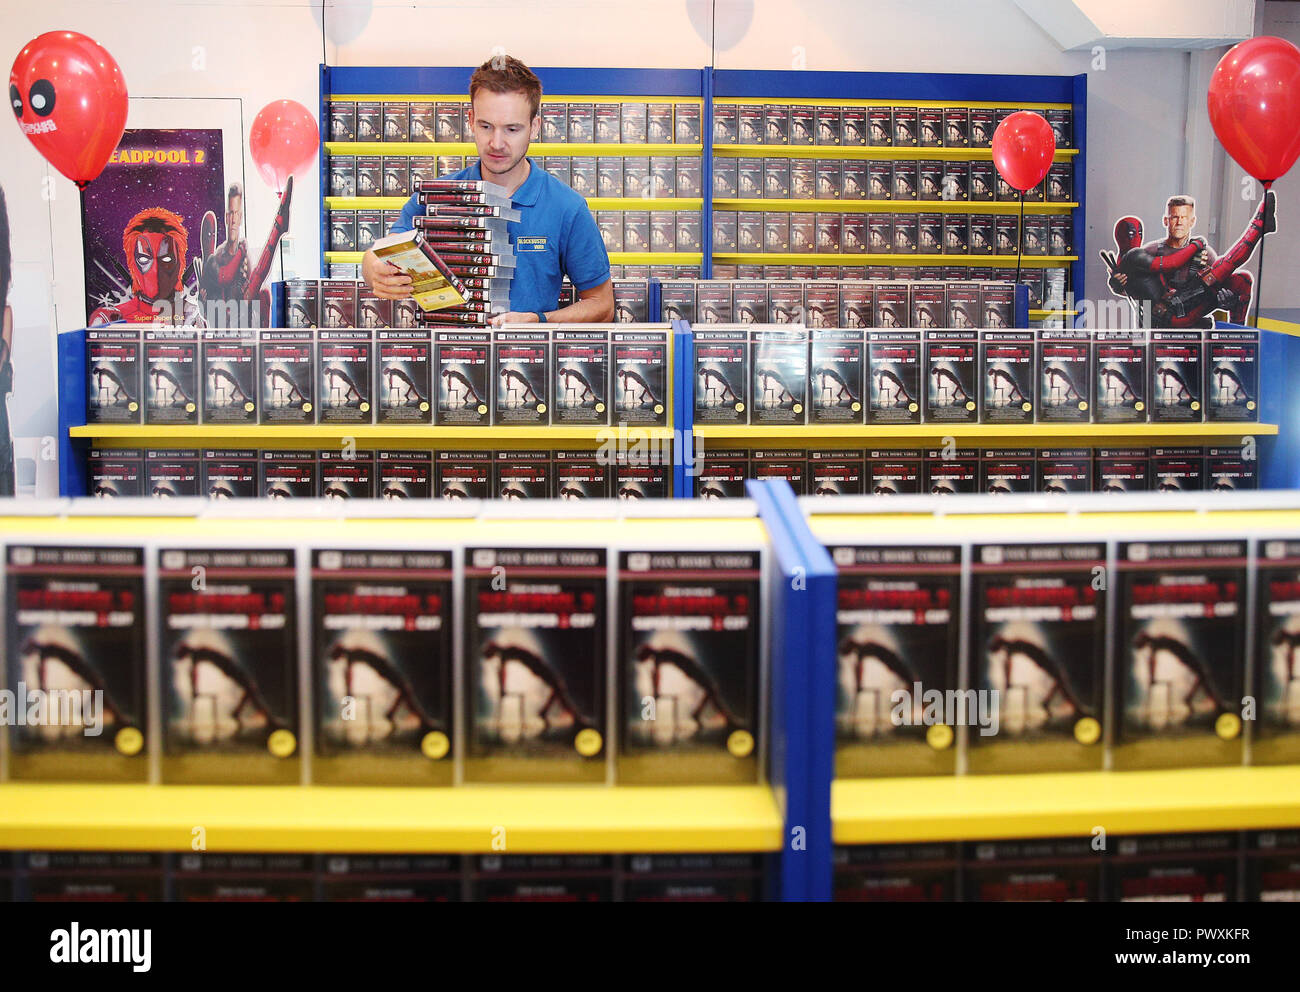 Be Kind Rewind... Fans flock to a new Blockbuster Video pop-up in  Shoreditch. The store has opened up for two days only in celebration of the  Blu-ray and DVD release of Deadpool